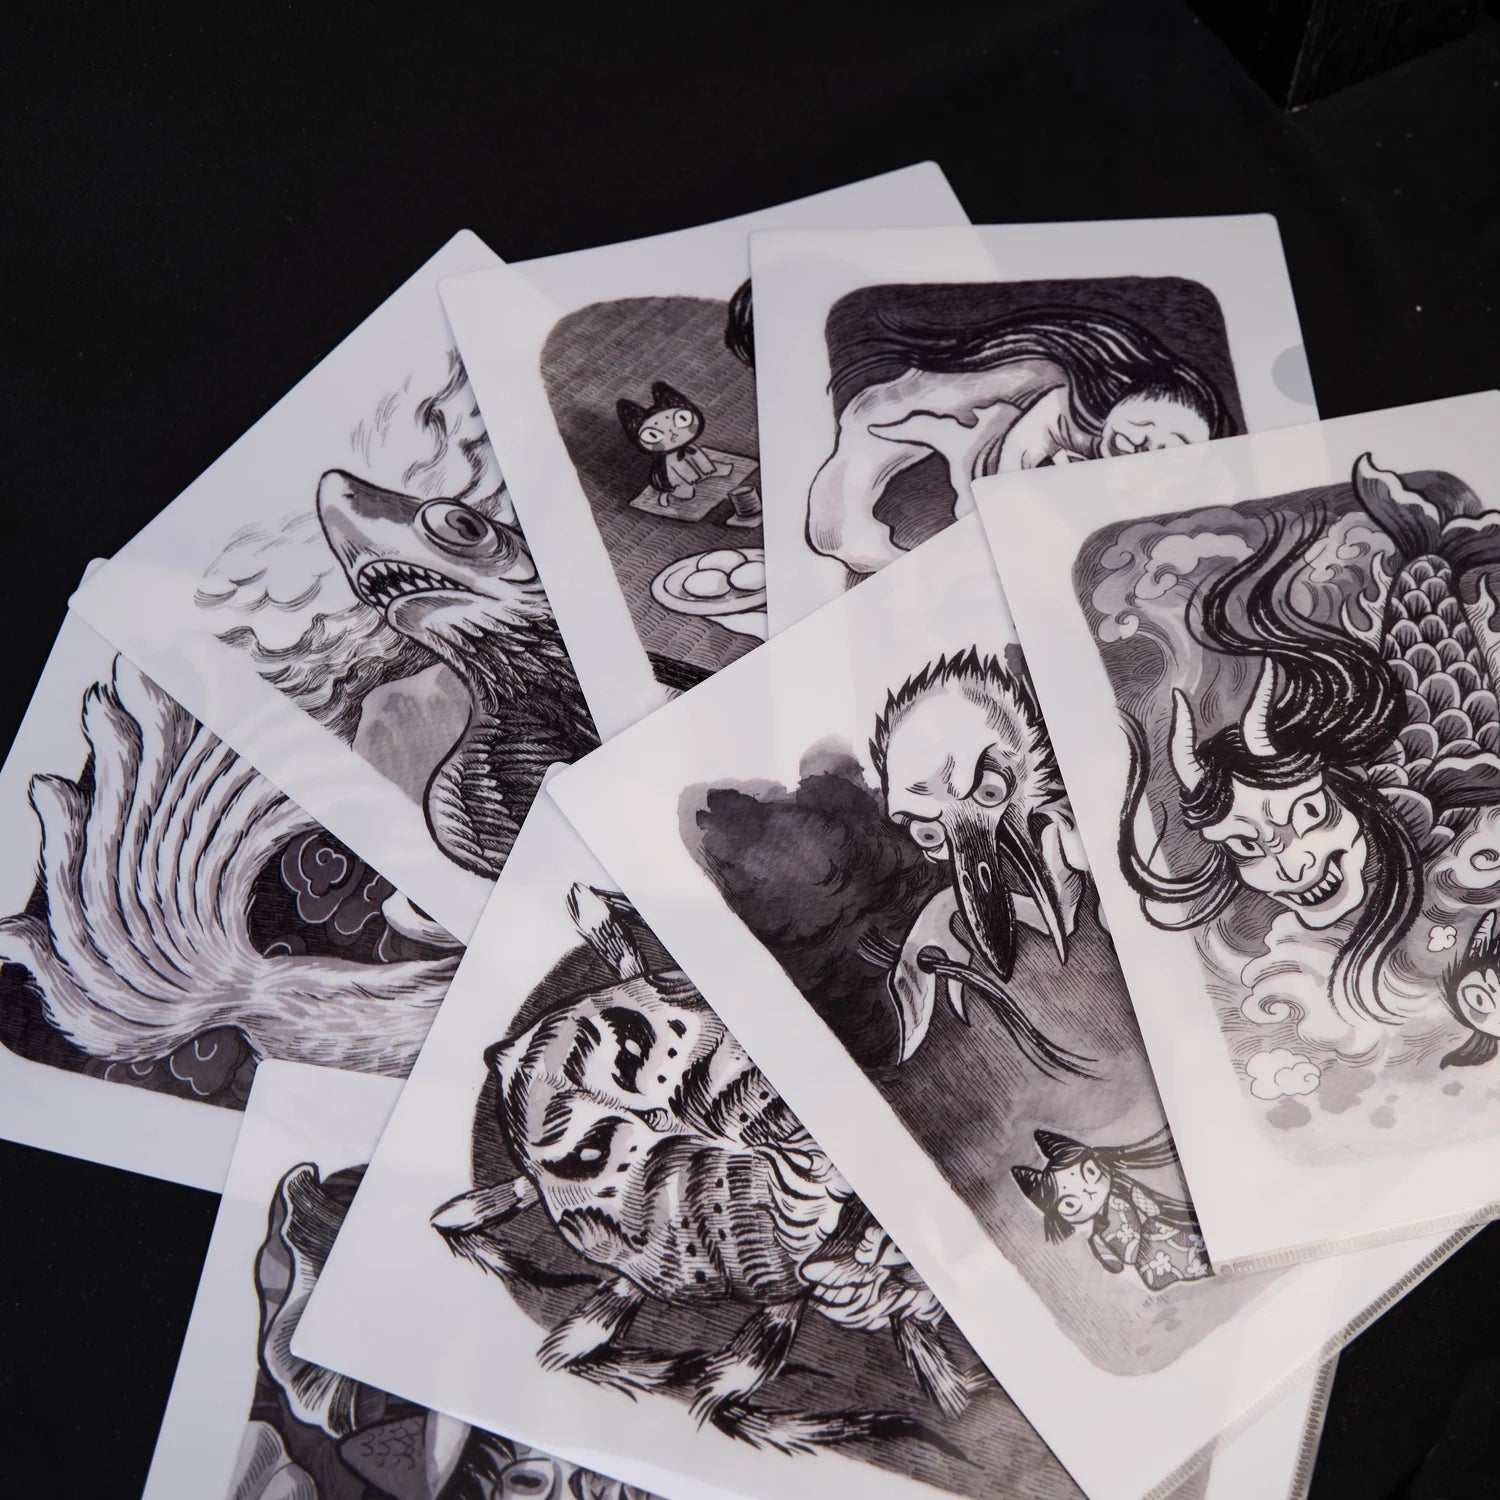 Sketches and drawings of various subjects, including a bird, demon, cat, and woman with long hair, part of BADMEAW Print SLEEVES: NINE A4 DESIGNS.